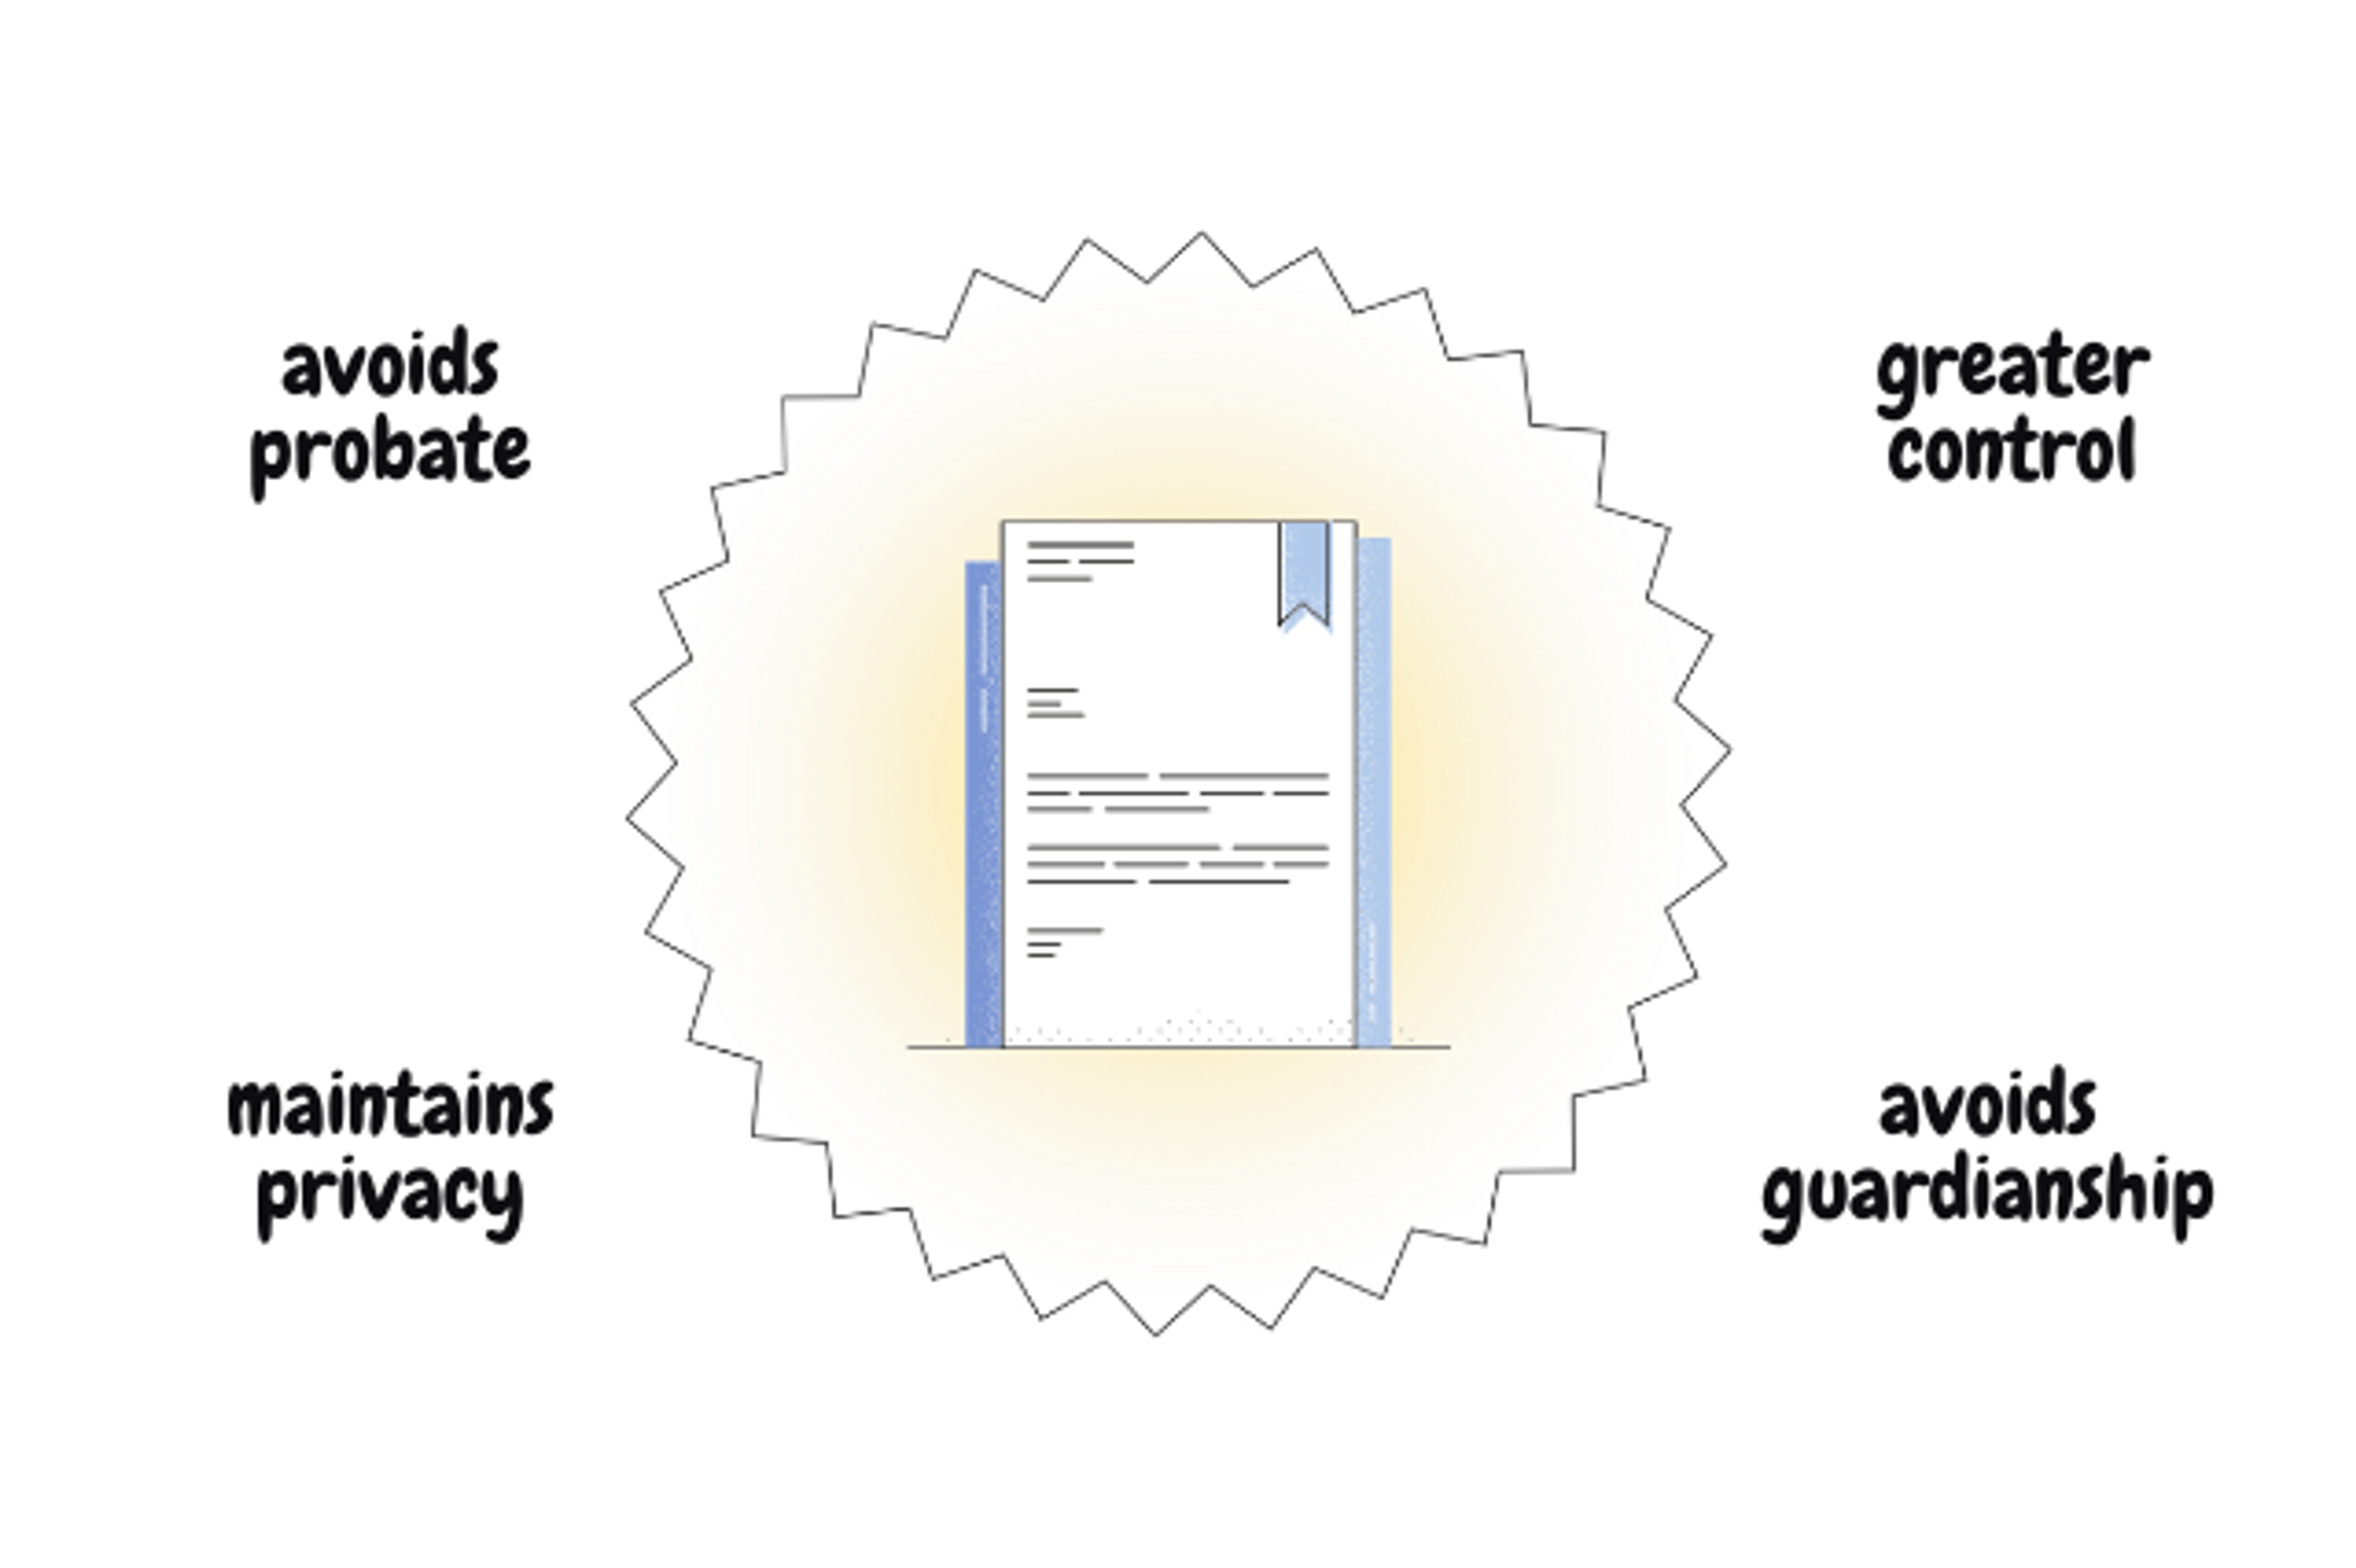 revocable living trust document graphic showing the advantages that it avoids probate, maintains privacy, offers greater control over gift distributions, and avoids guardianship